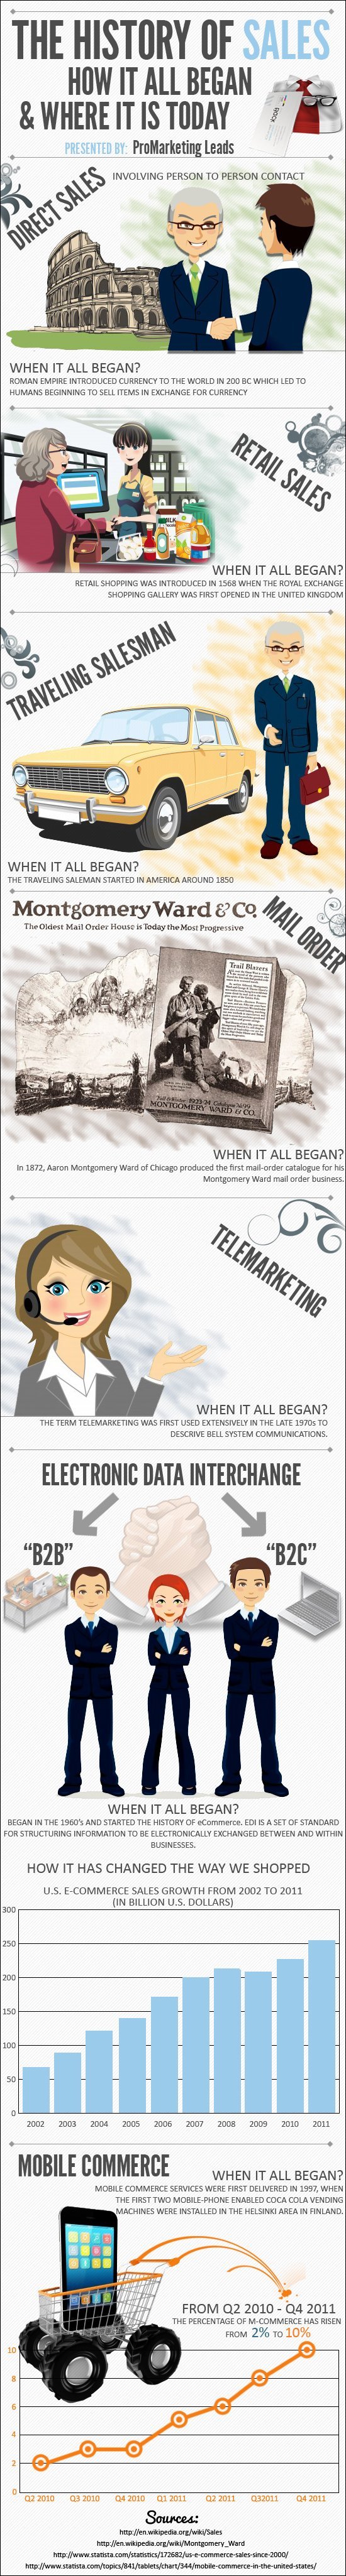 Promarketing Leads infographic Final